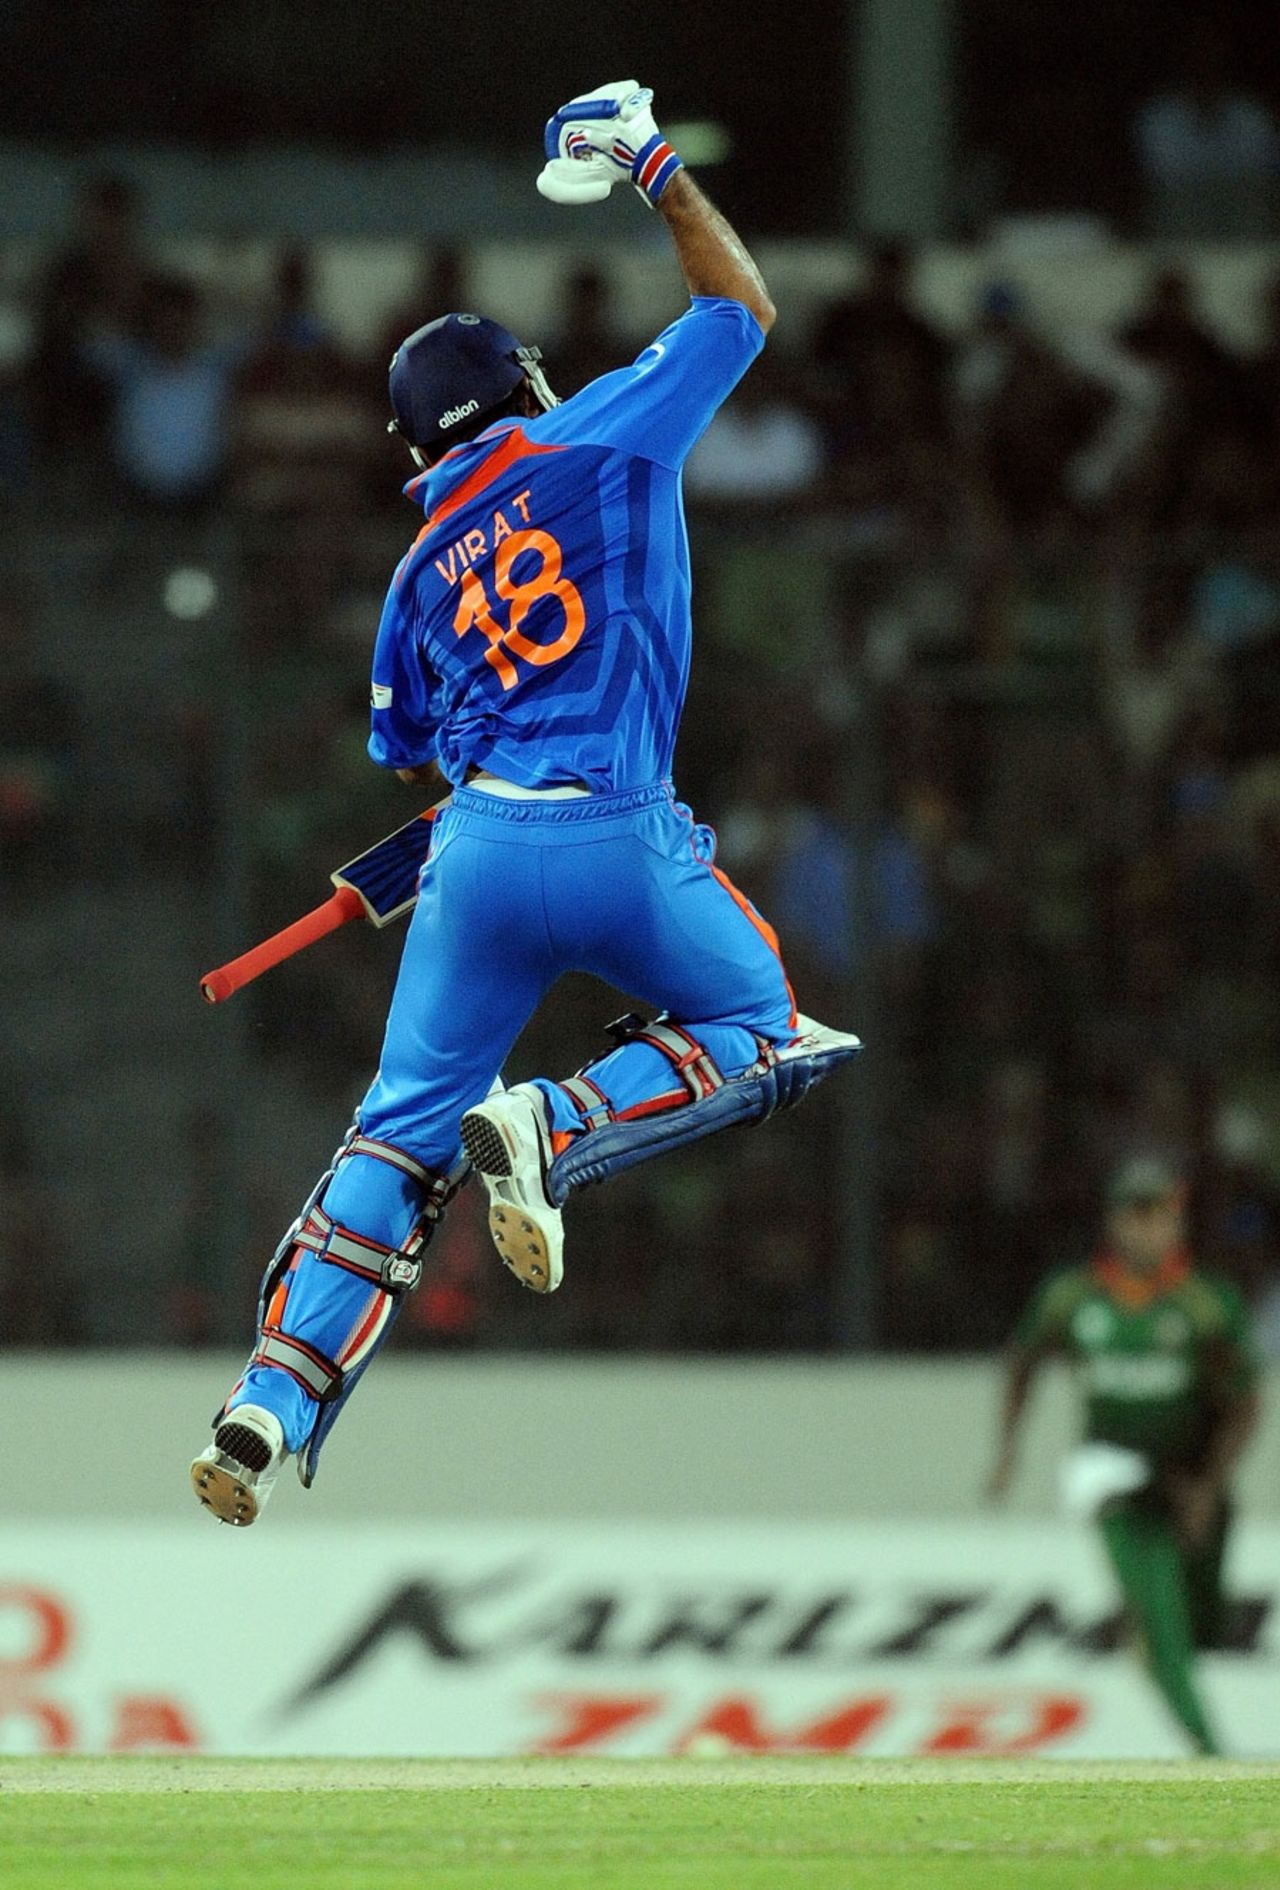 Virat Kohli leaps after getting to a hundred off 83 balls, Bangladesh v India, Group B, World Cup 2011, Mirpur, February 19, 2011